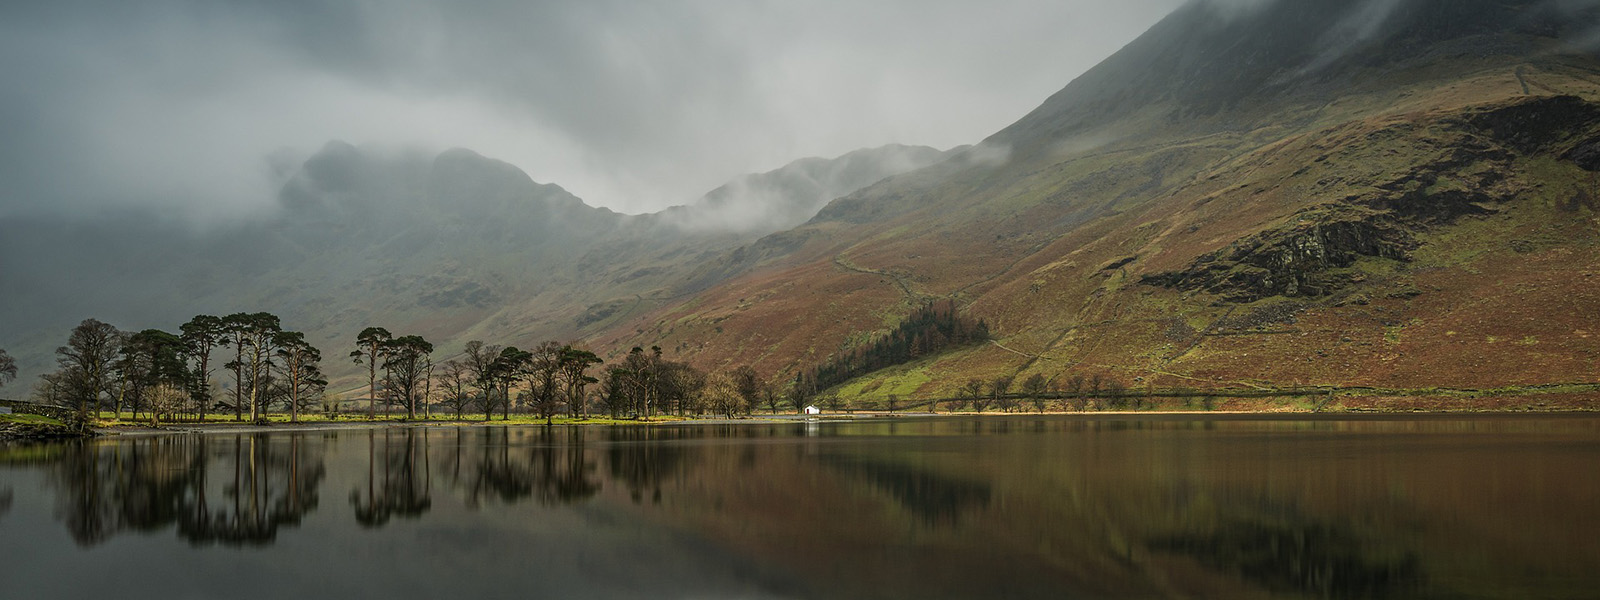 Lake Buttermere in Cumbria. A stormy sky mirrored in the still waters of the lake.